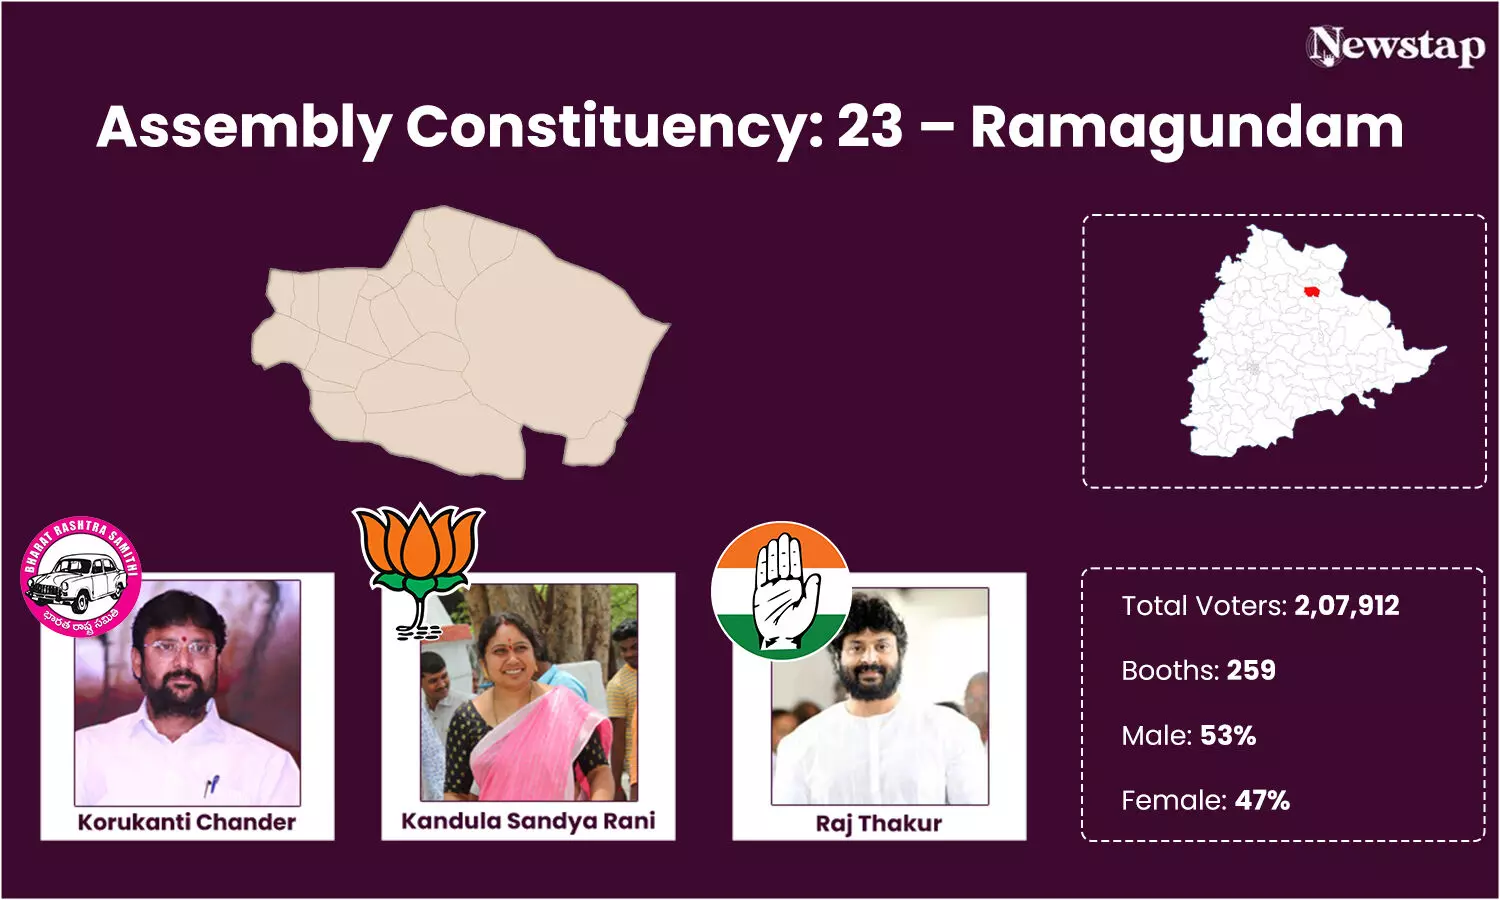 Familiar BRS candidate up against popular Congress leader in Ramagundam